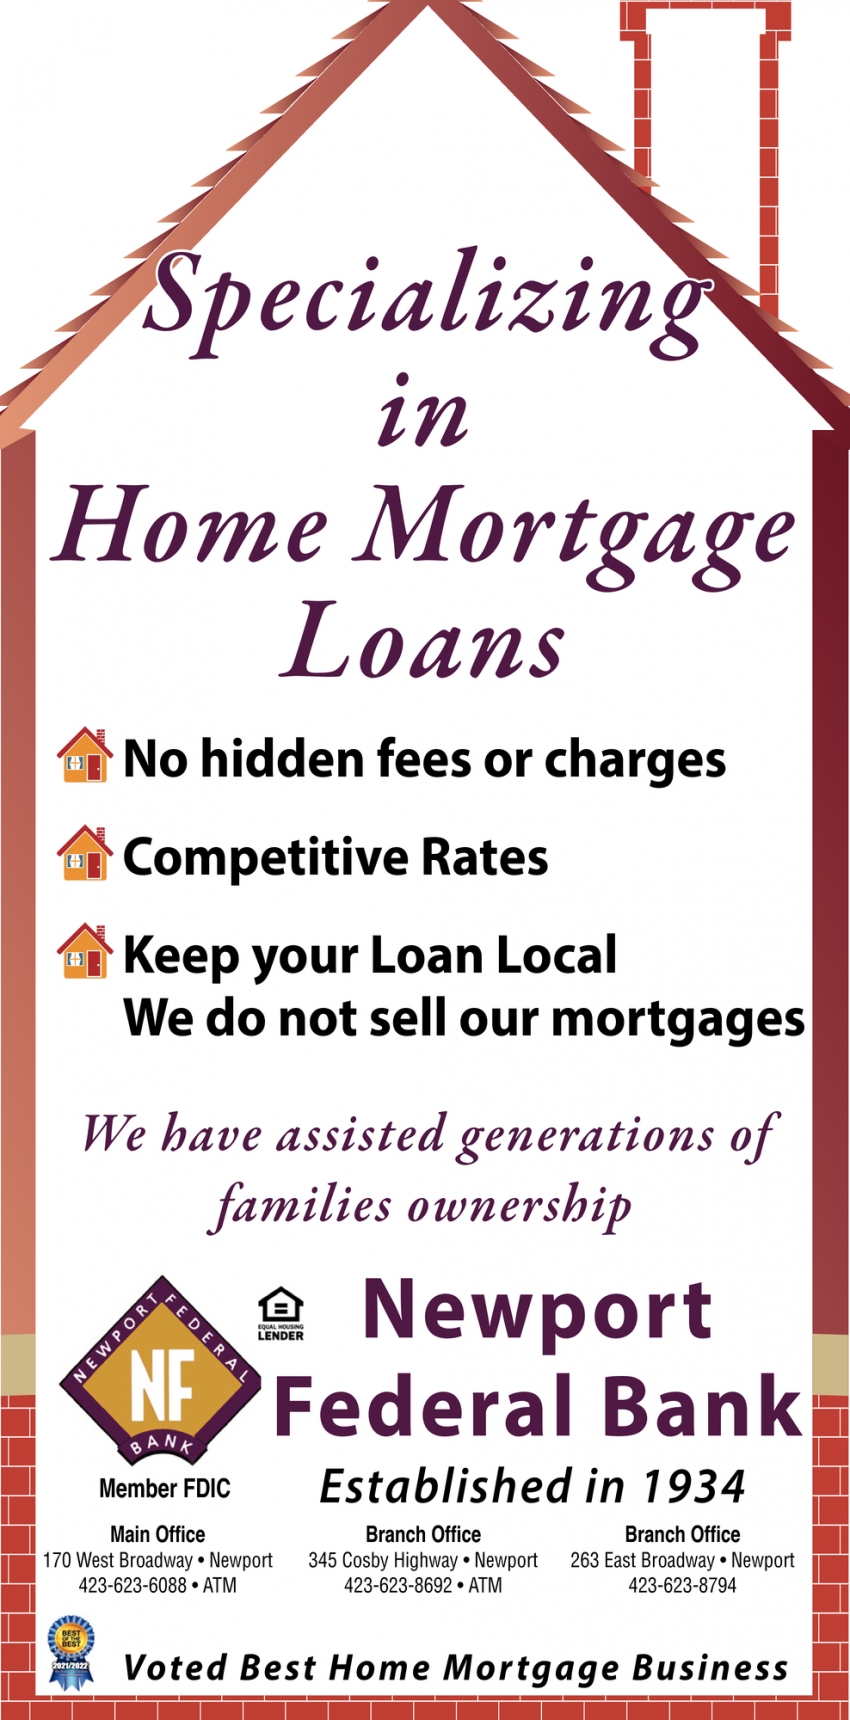 Specializing In Home Mortgage Loans